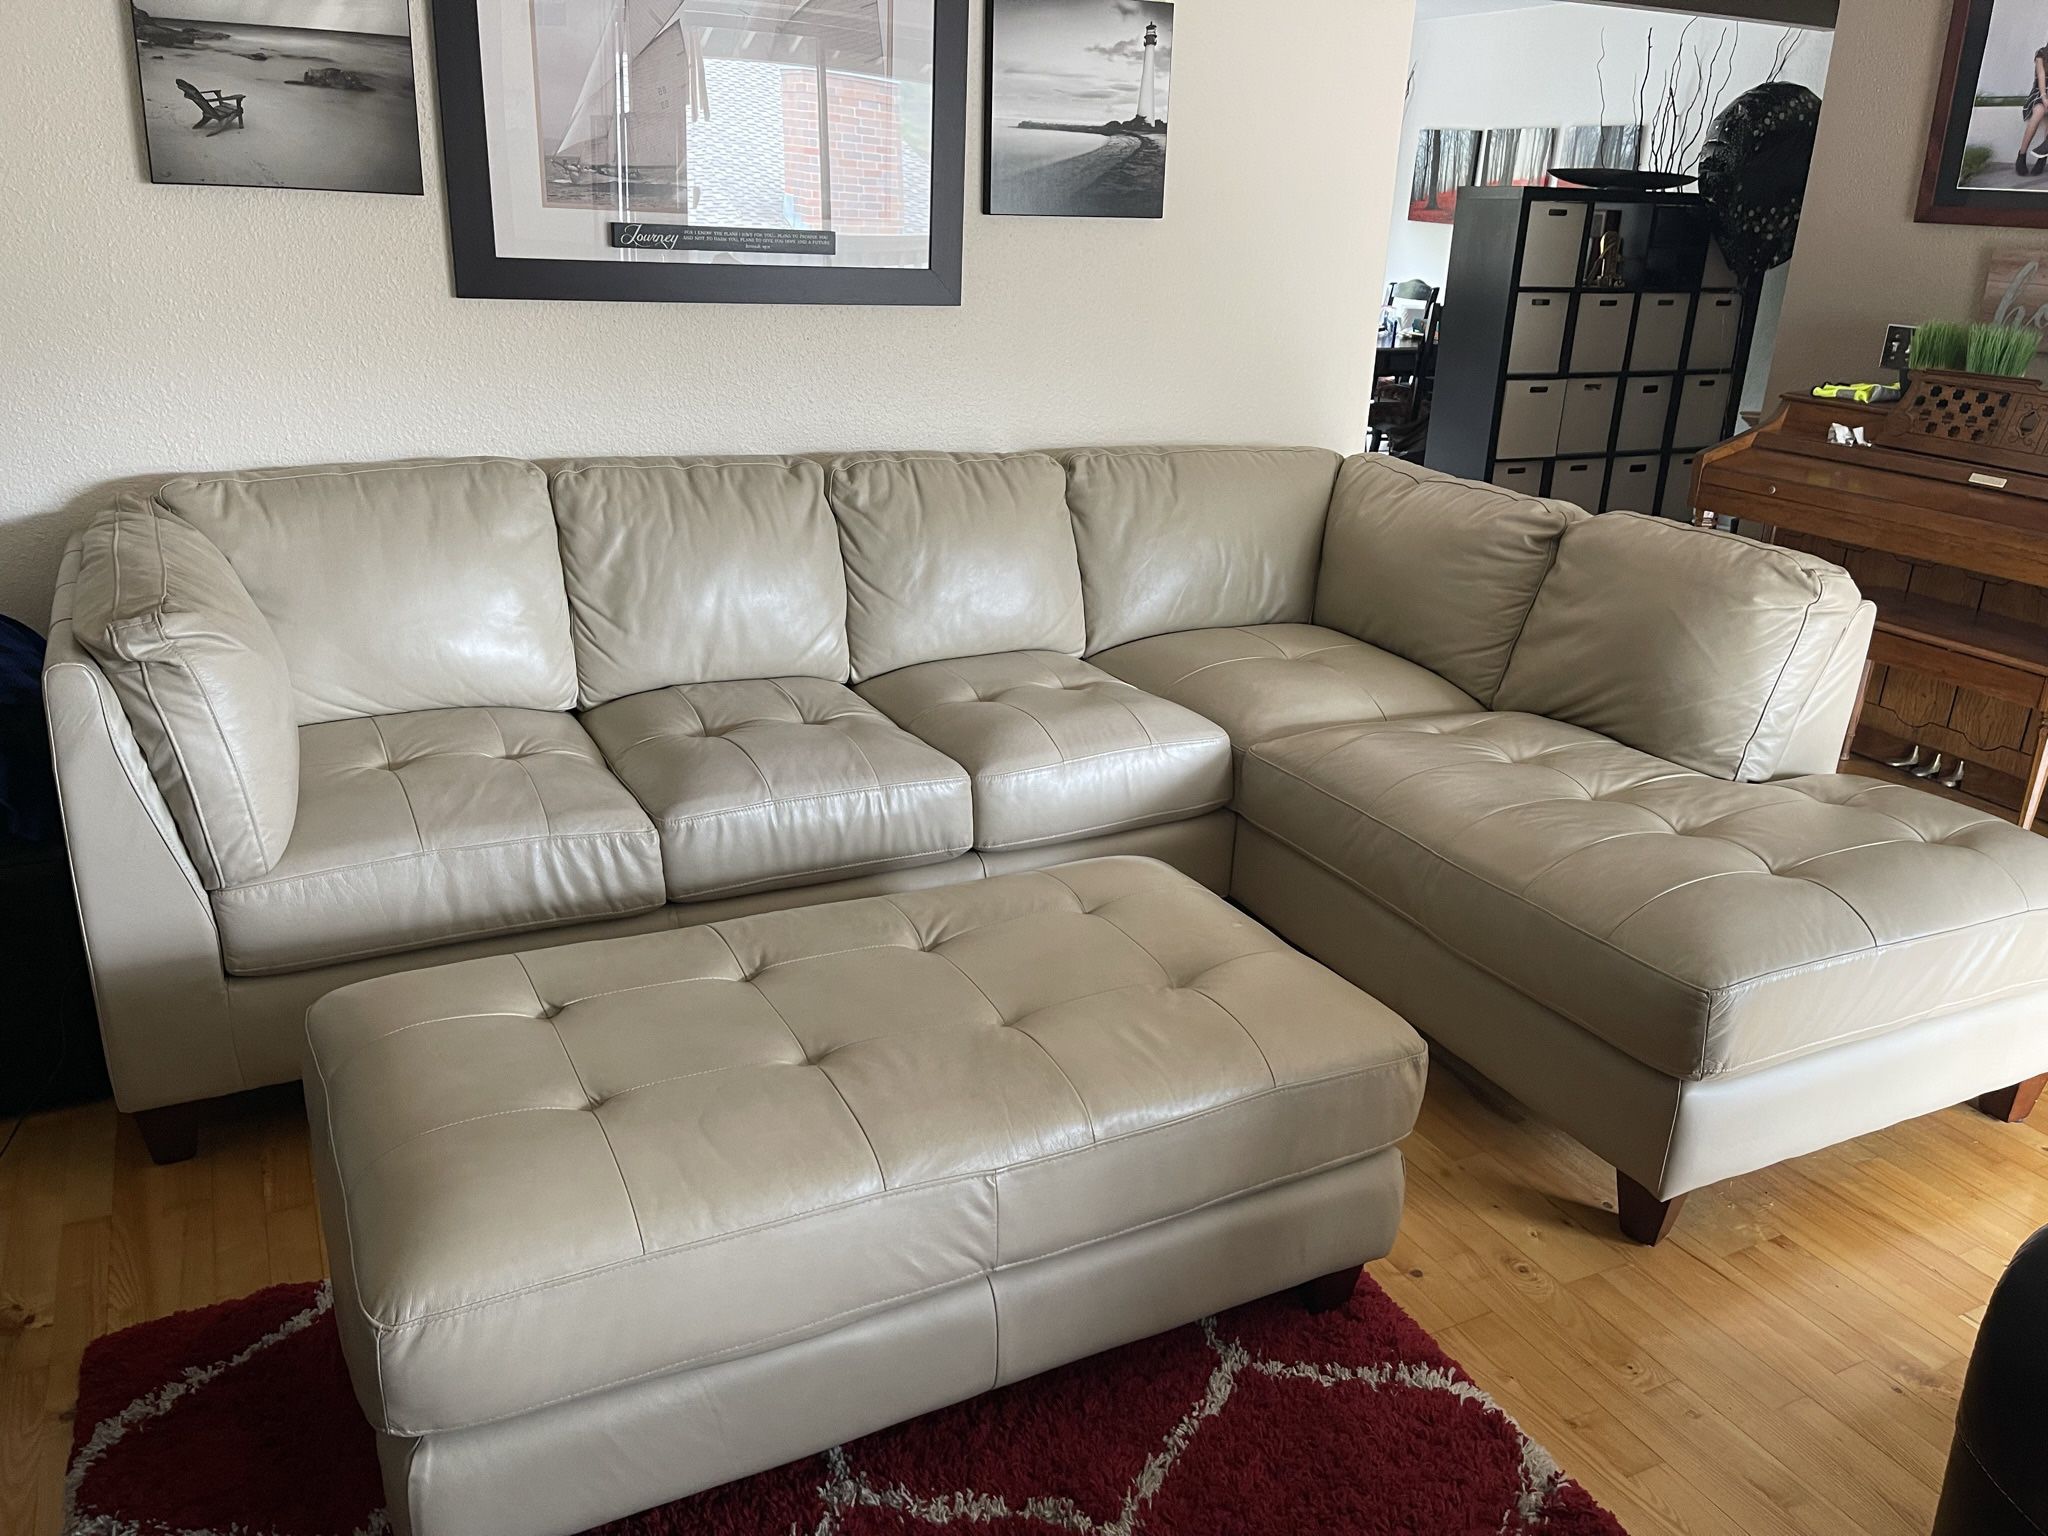 Gorgeous Leather Sleeper Sofa Sectional With Ottoman